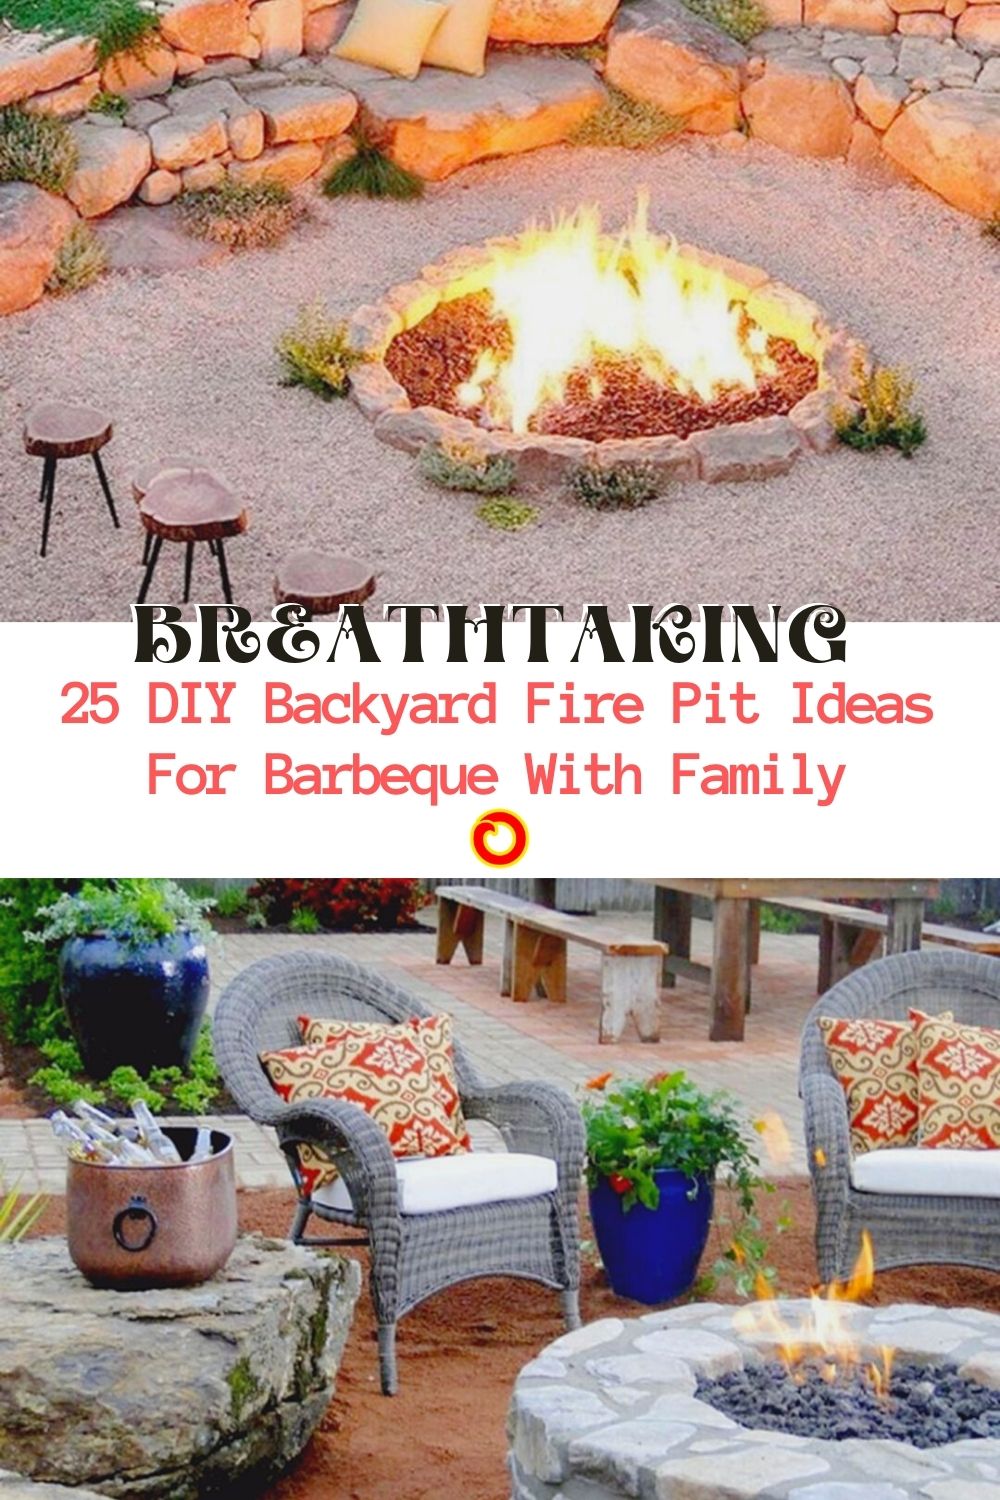 Breathtaking 25 DIY Backyard Fire Pit Ideas For Barbeque With Family